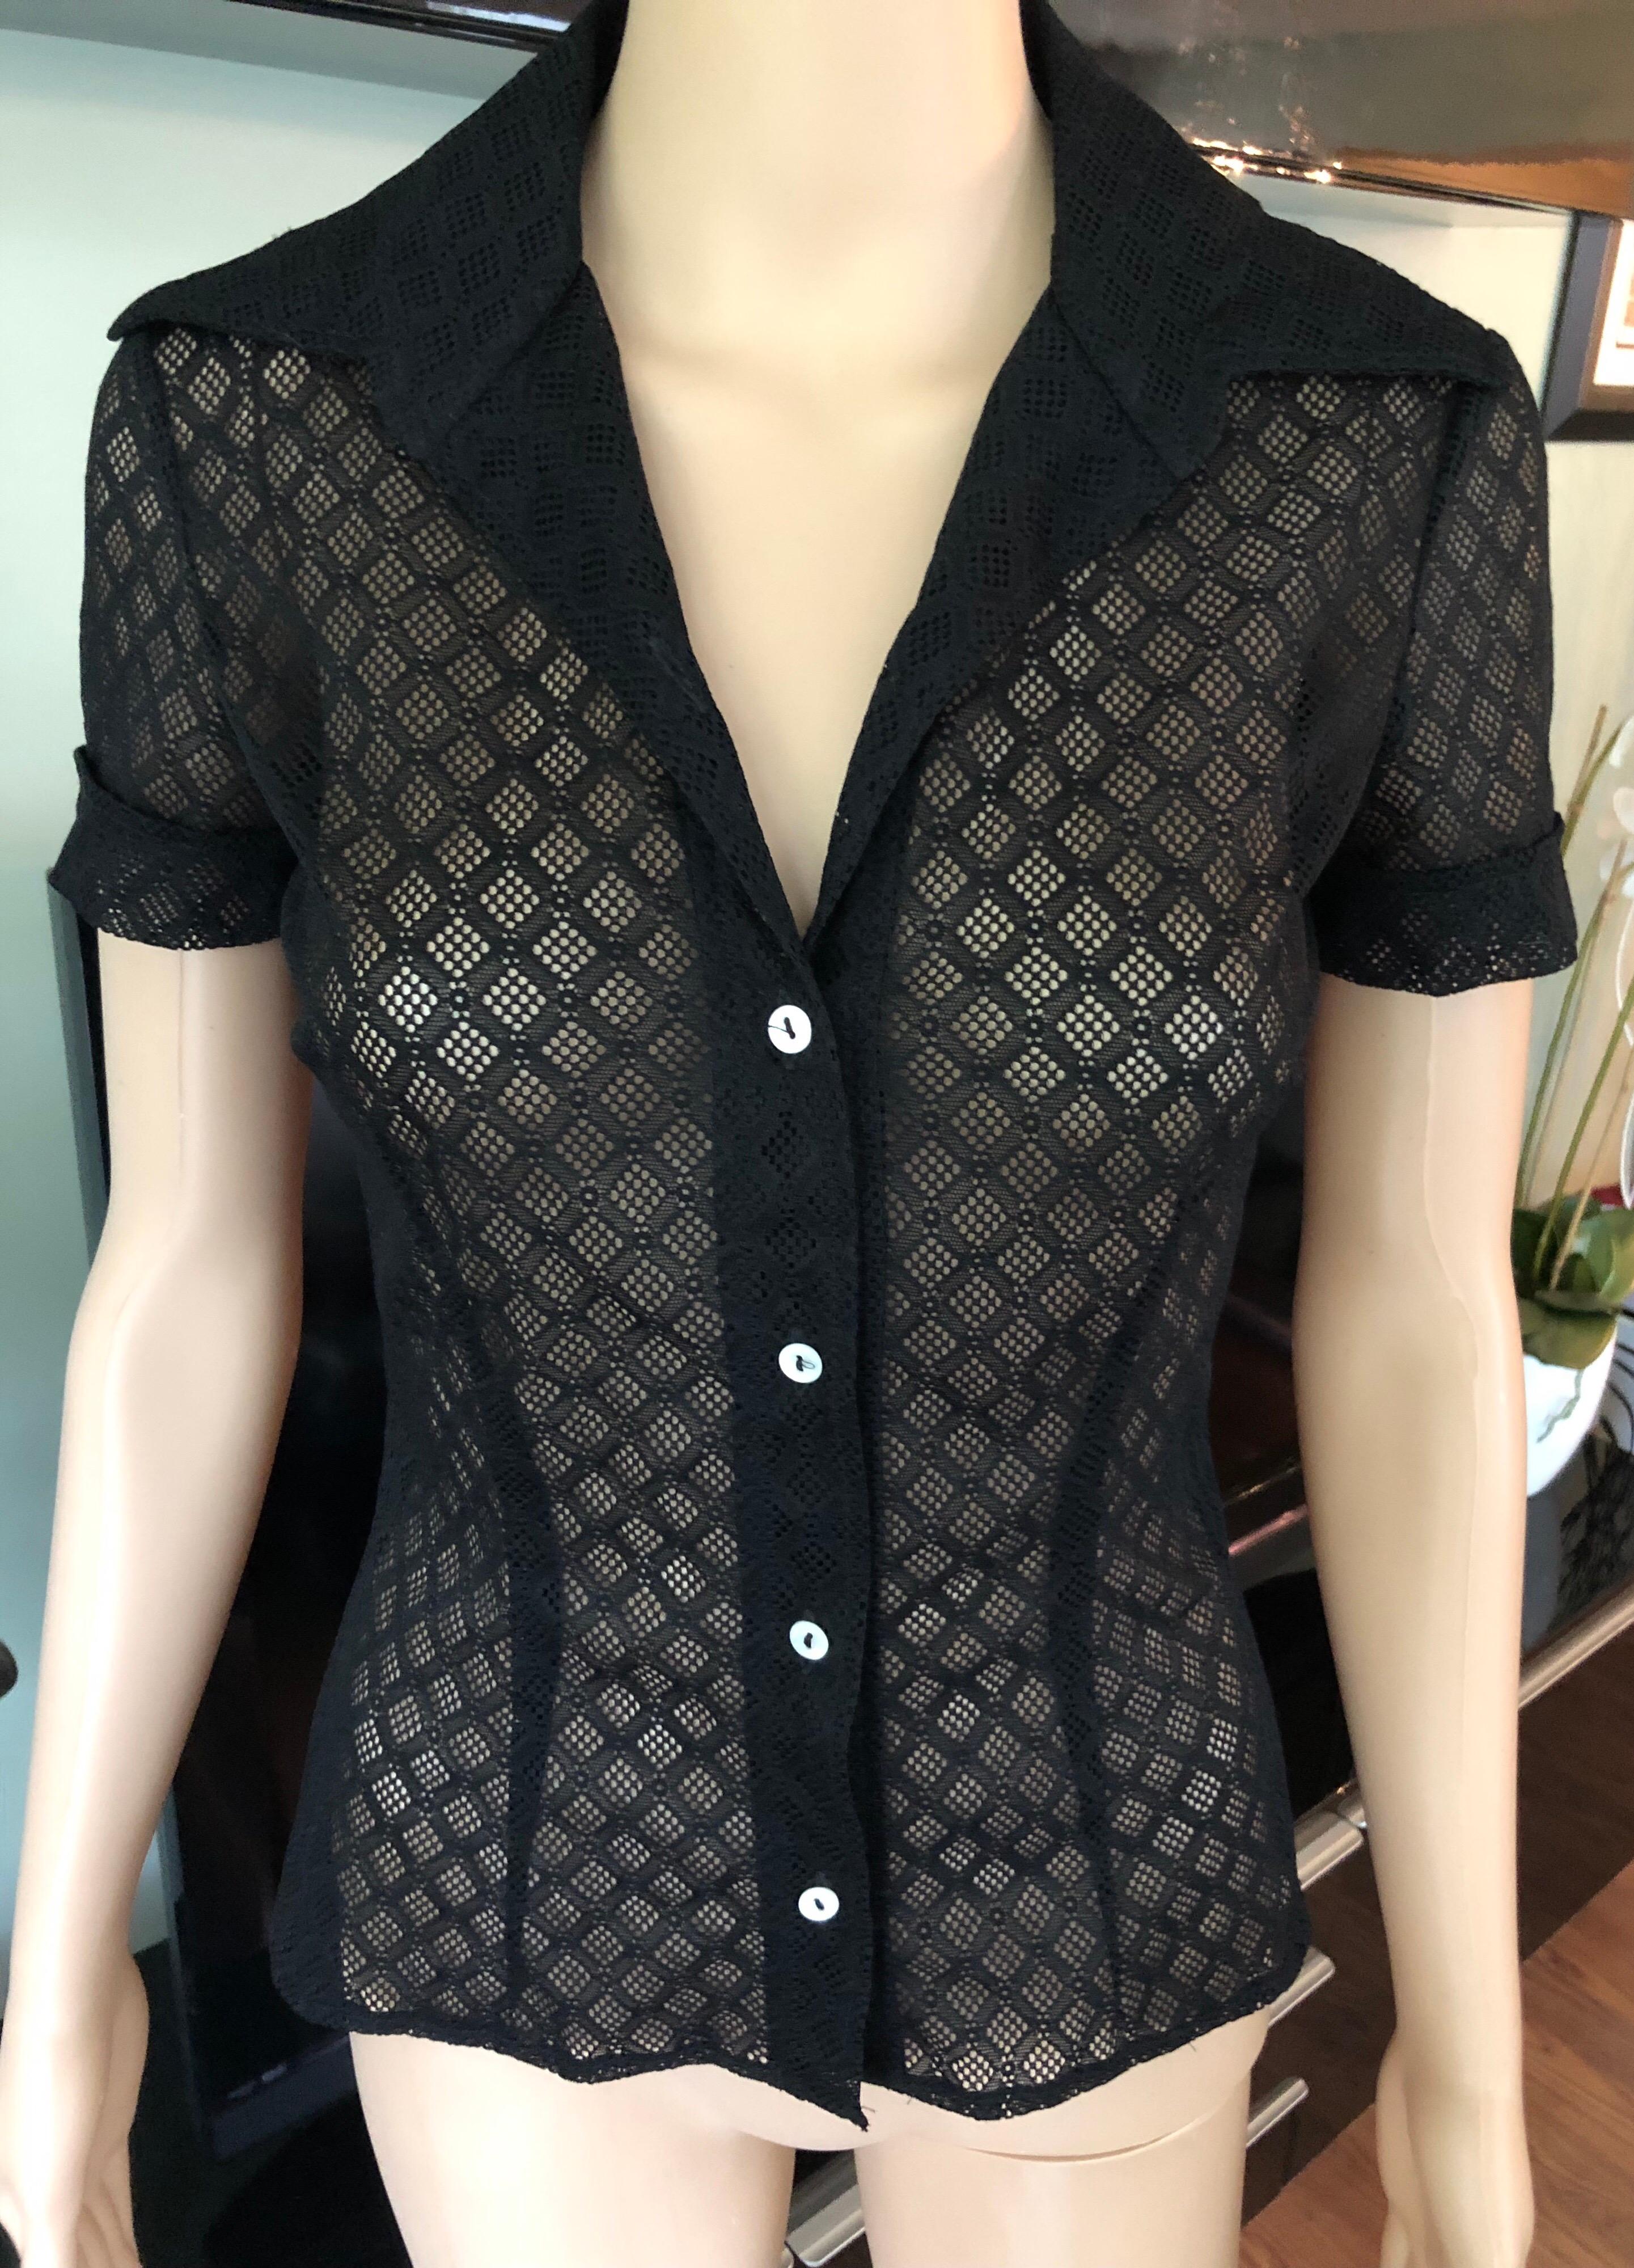 Dolce & Gabbana Vintage Sheer Mesh Lace Eyelet Button-Up Black Top Shirt  In Good Condition For Sale In Naples, FL